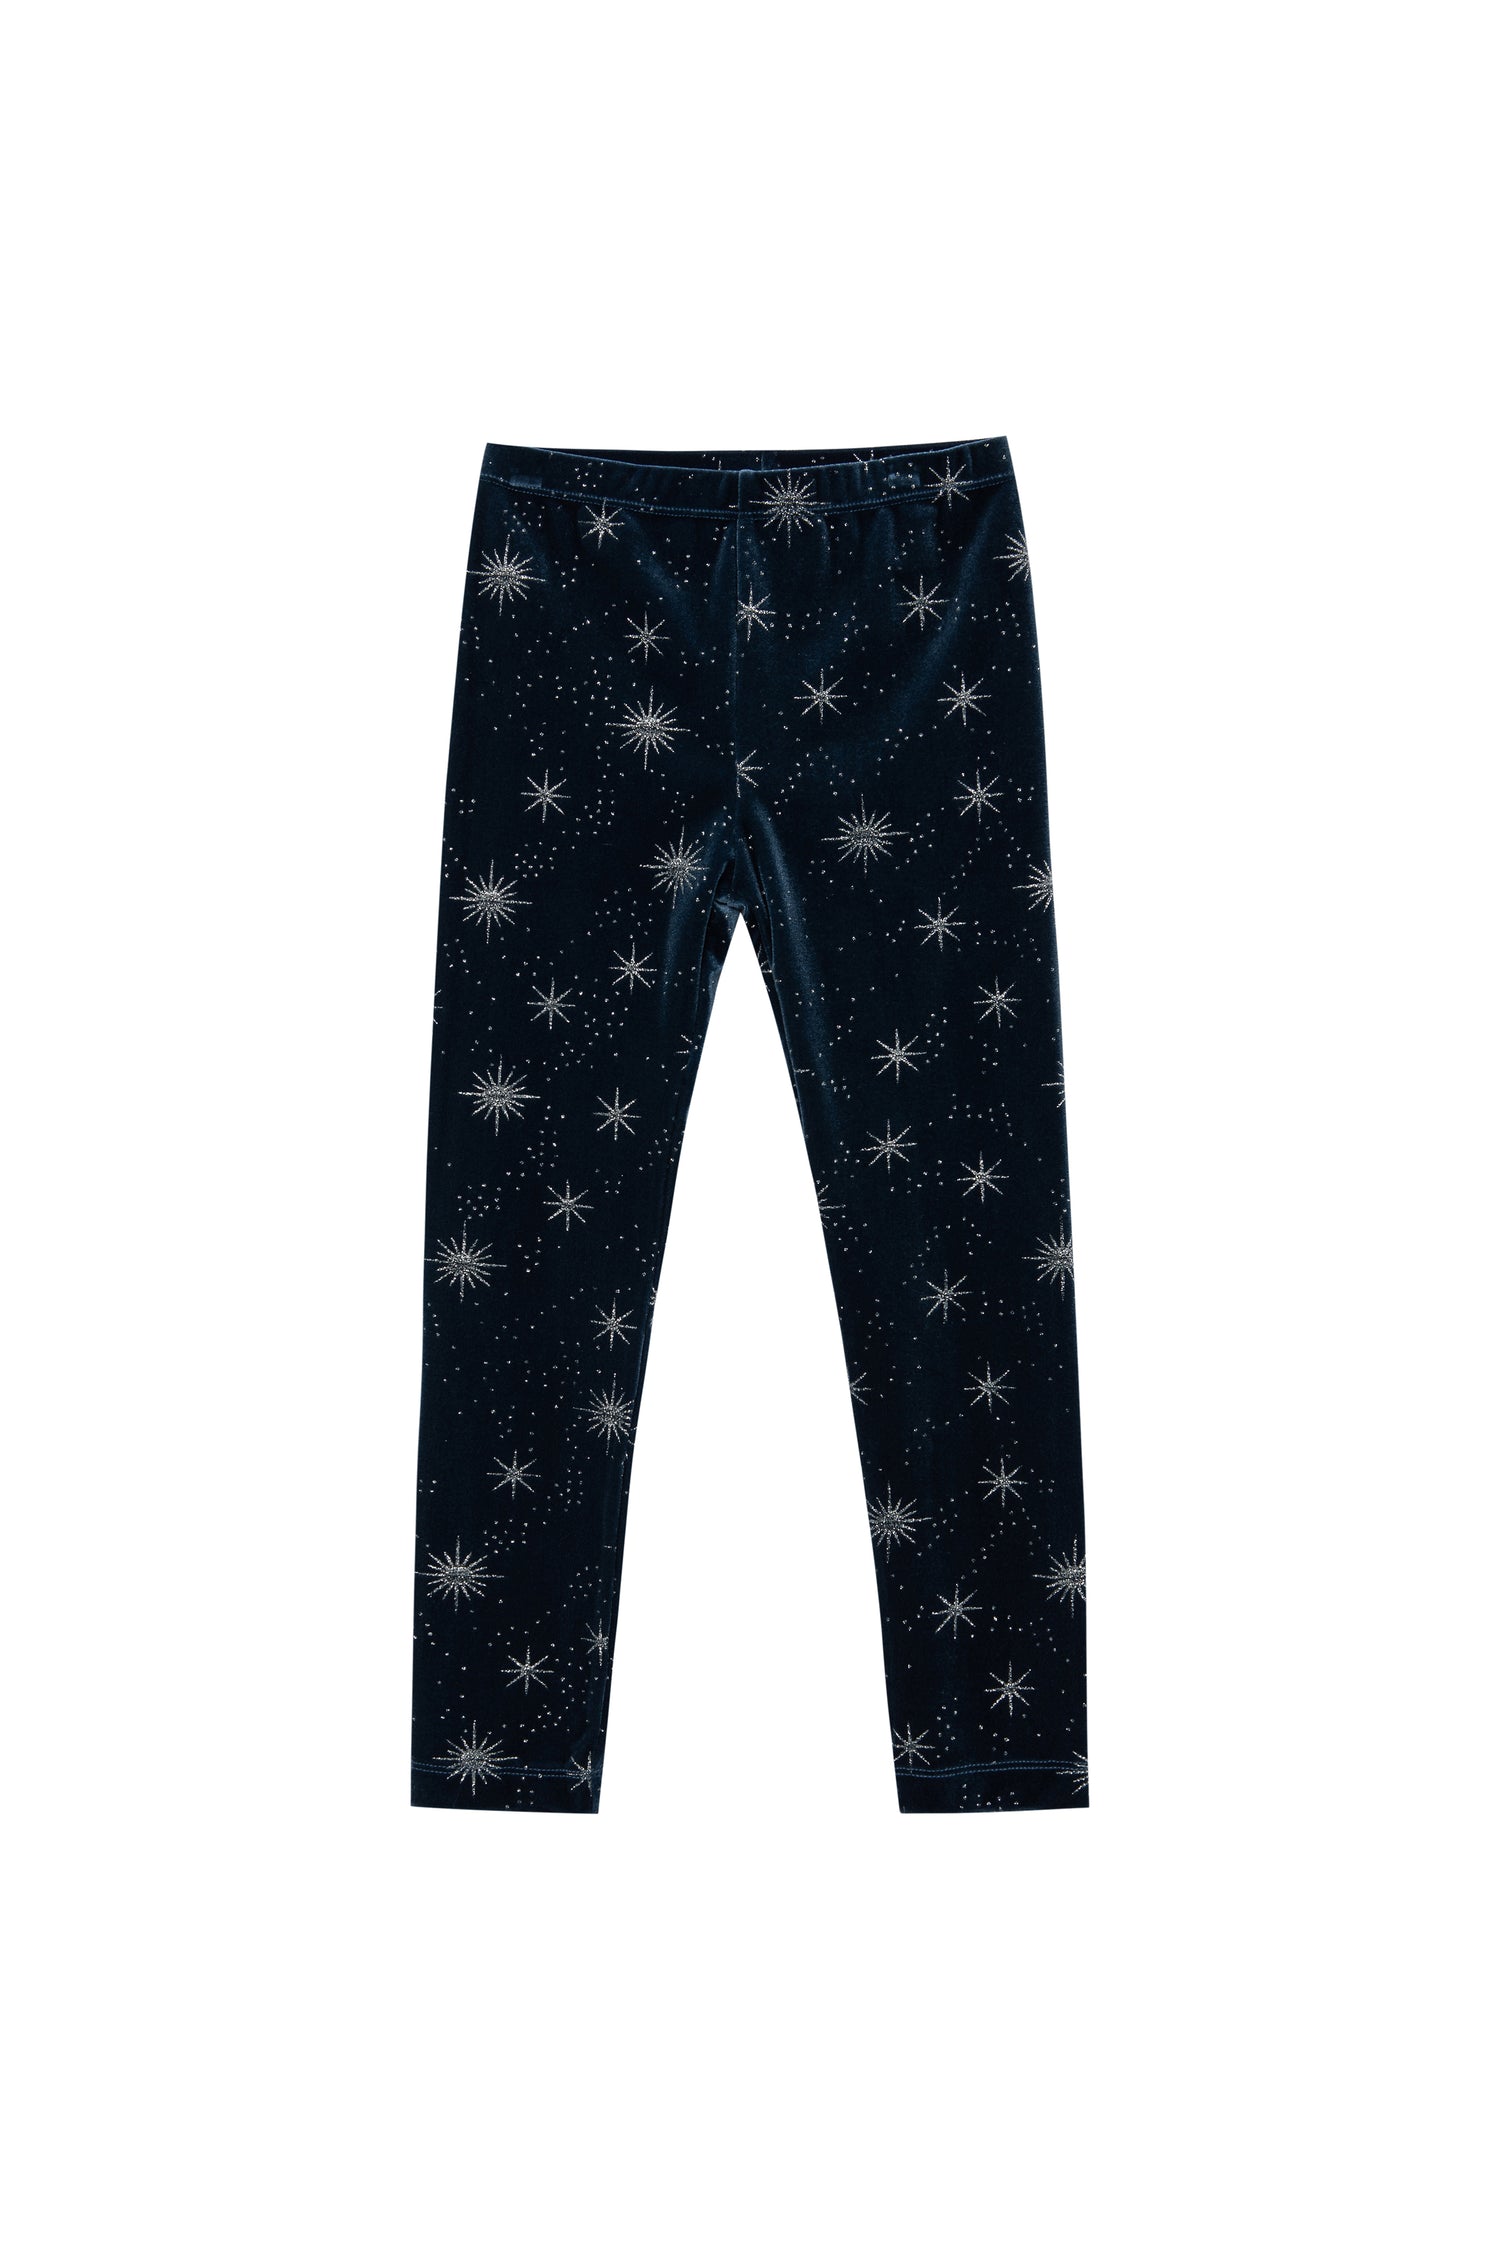 Front view of navy velour leggings with glitter print 